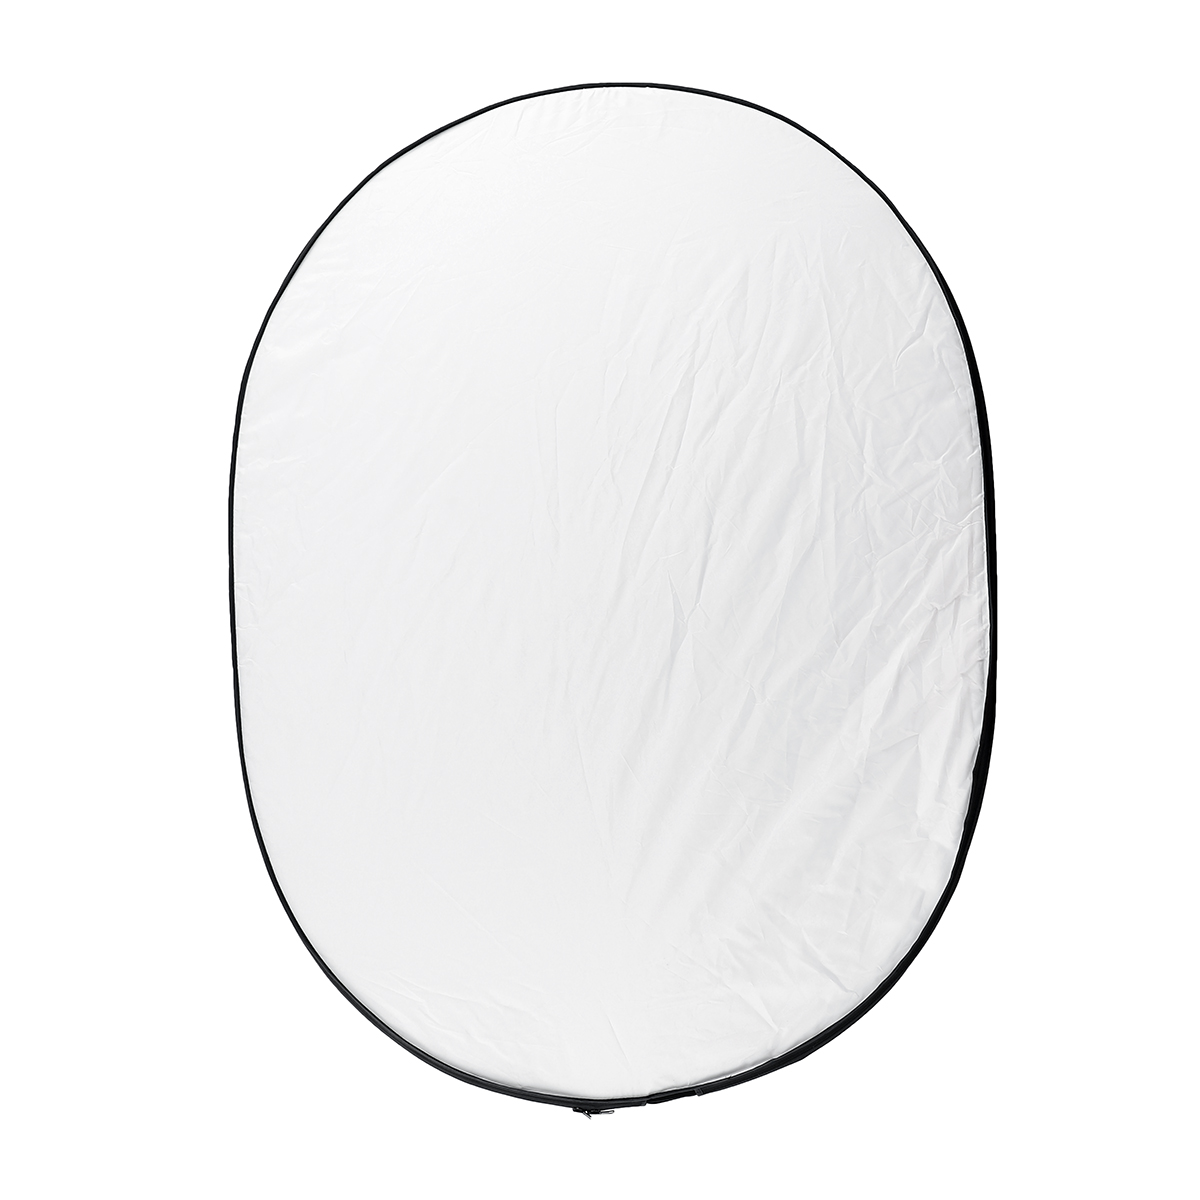 Find 7 in 1 Light Diffuser Round Reflector Multi Disc Bag For photography Portable for Sale on Gipsybee.com with cryptocurrencies